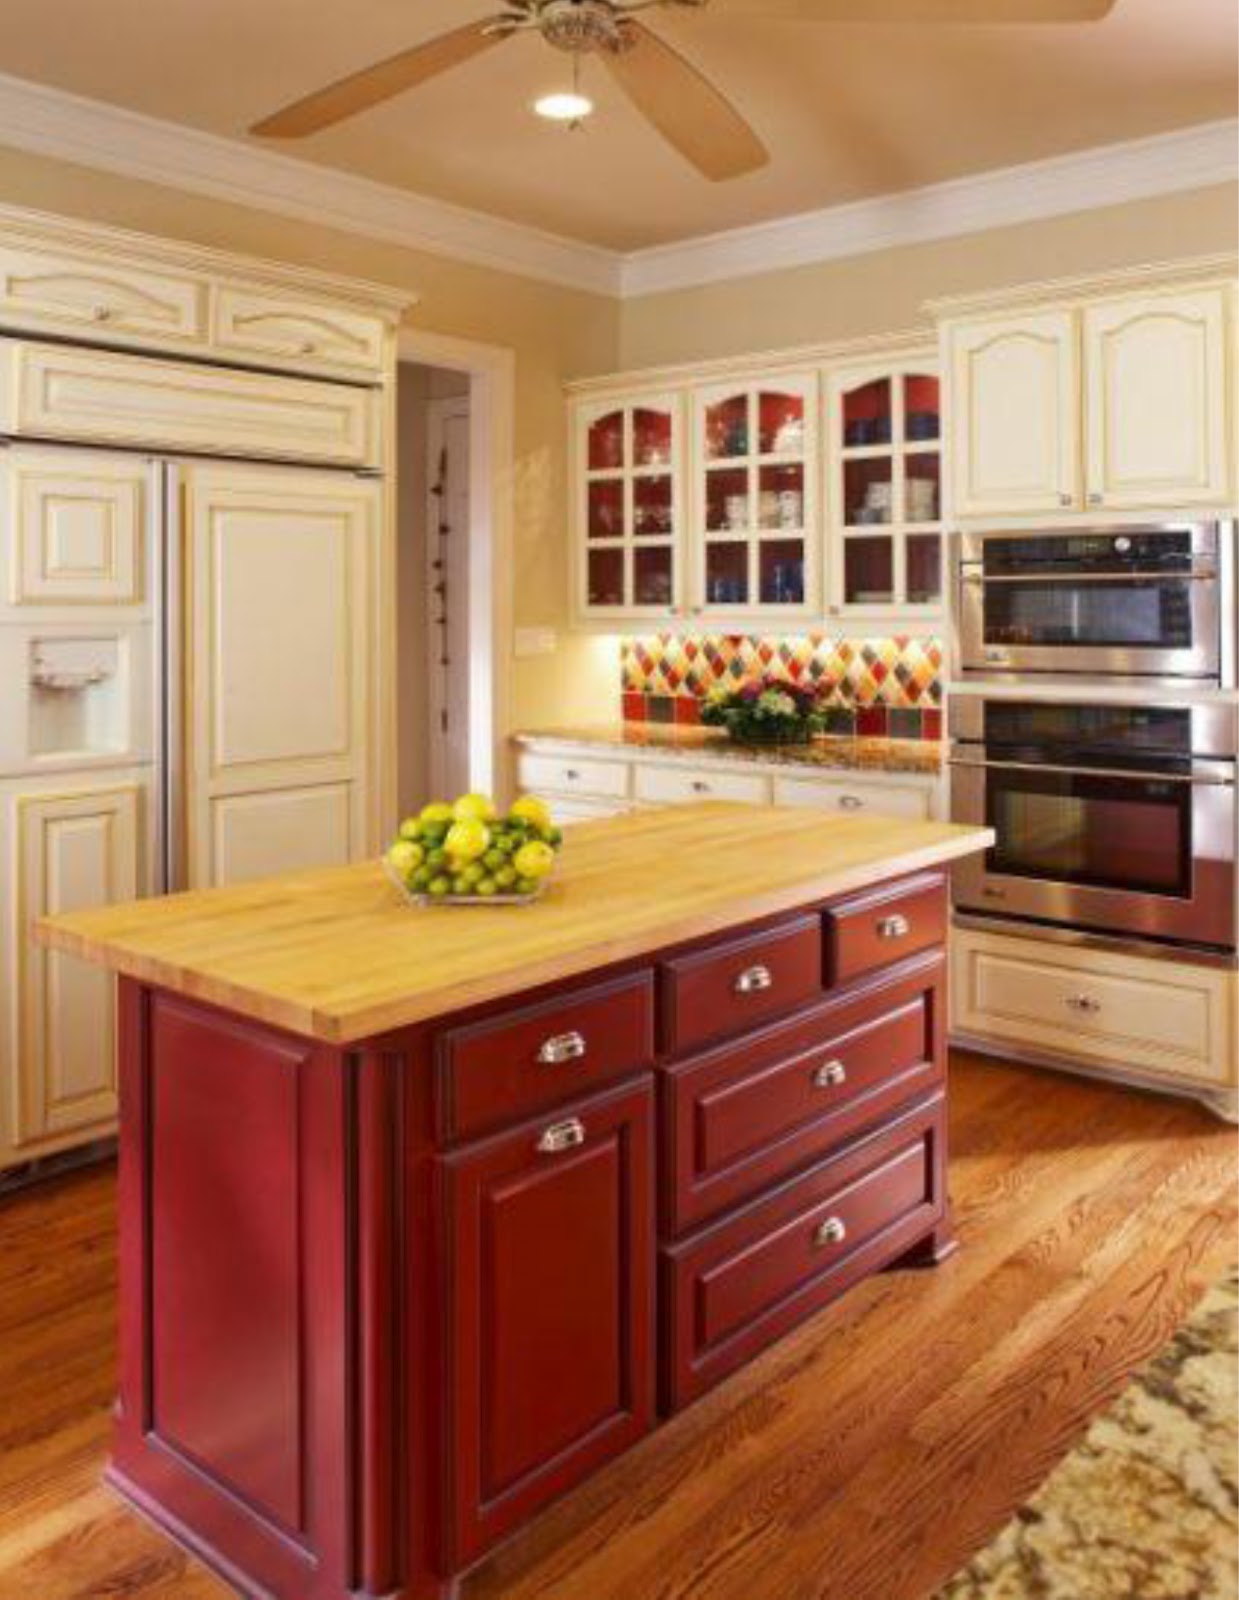 Kitchens With Cream Colored Cabinets